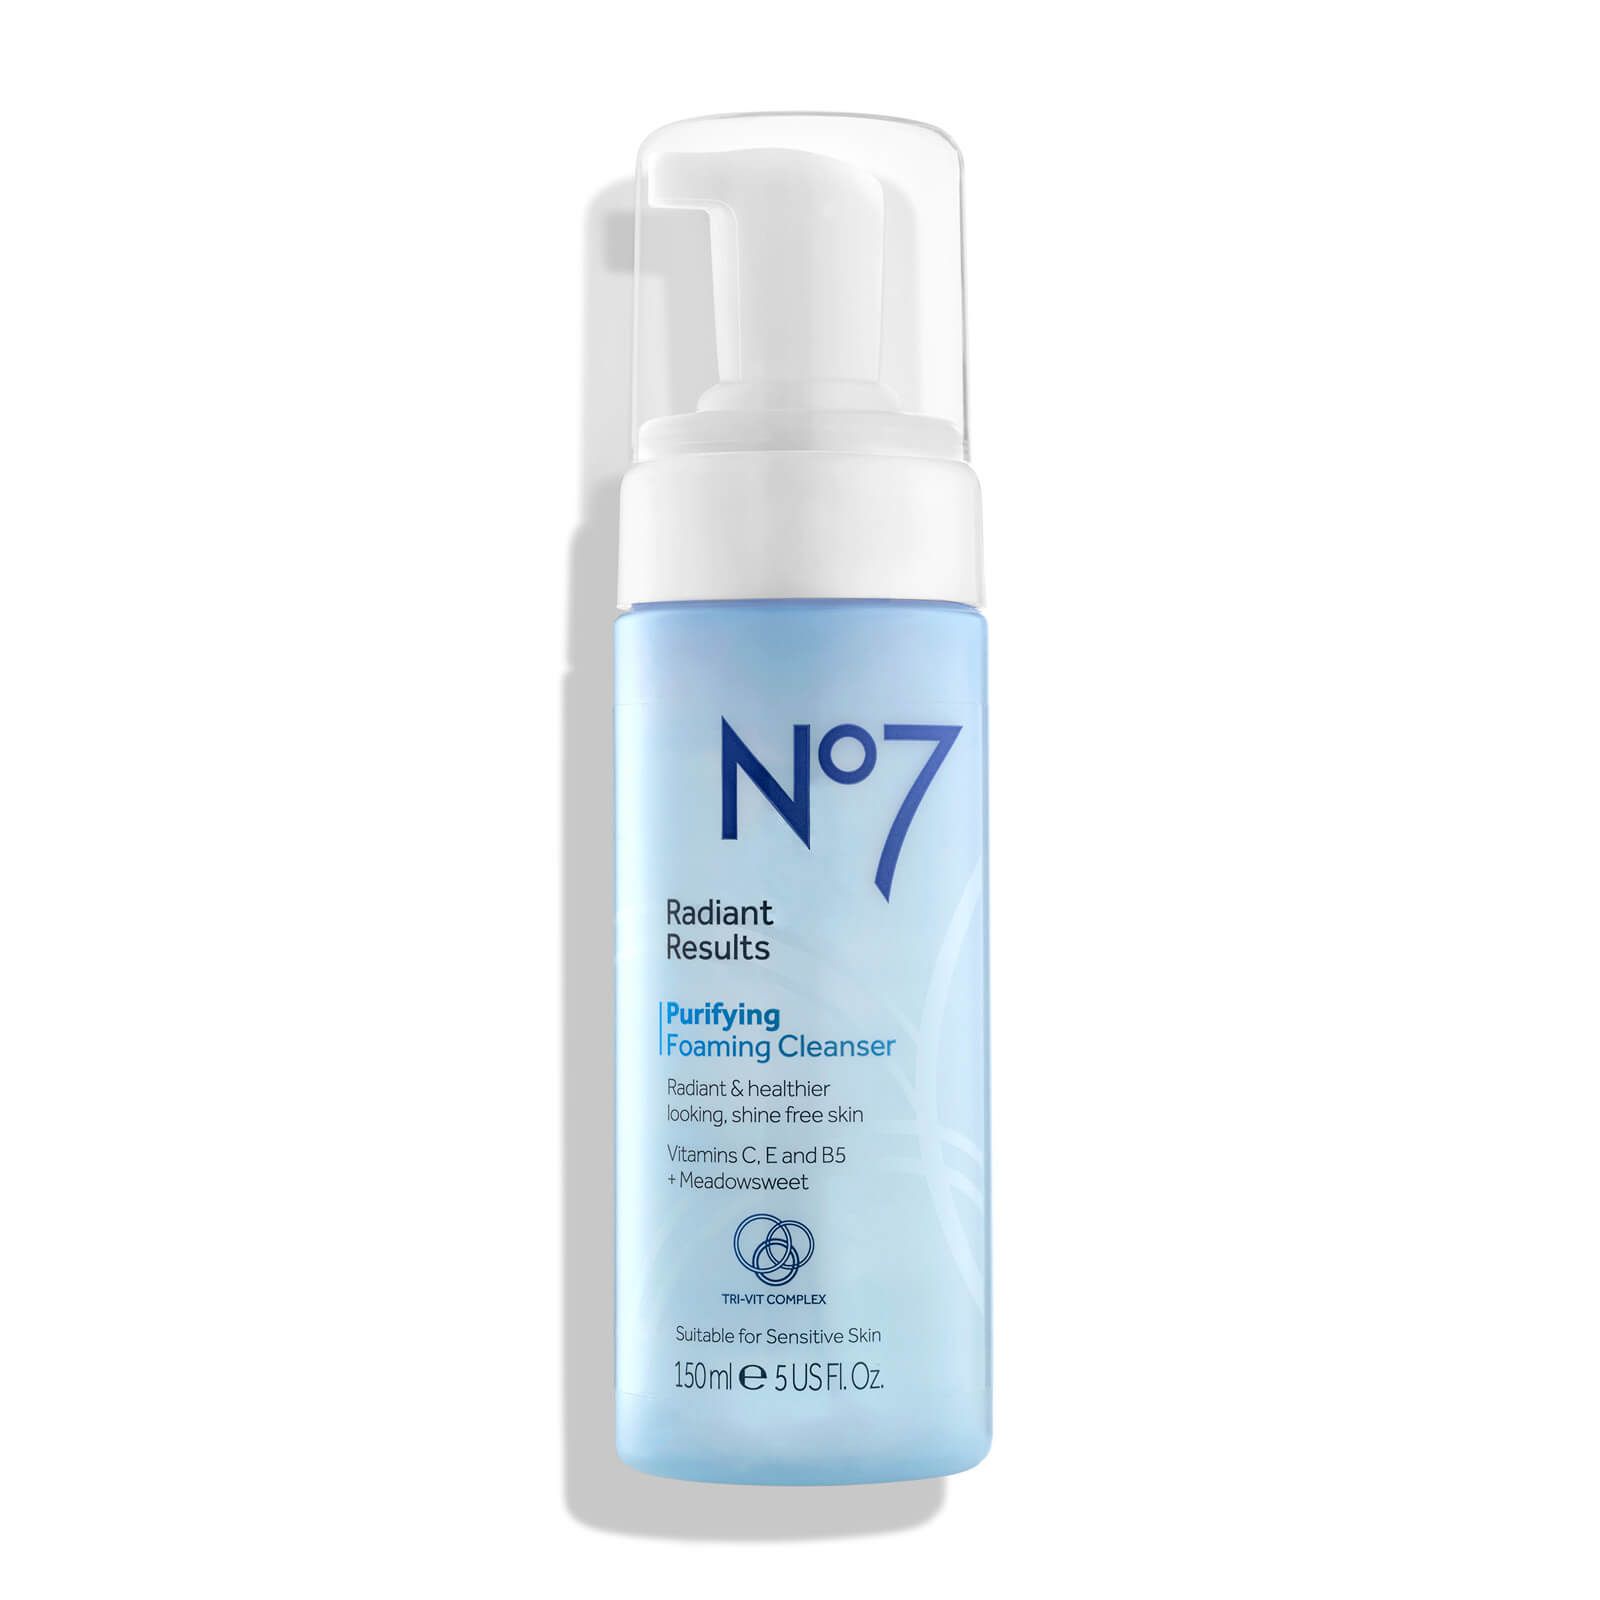 Purifying cleanser foam. No 7 instant Results Nourishing Hydration Mask 100 ml.. Foaming Cleanser. Bubble Purifying Foaming Cleanser.